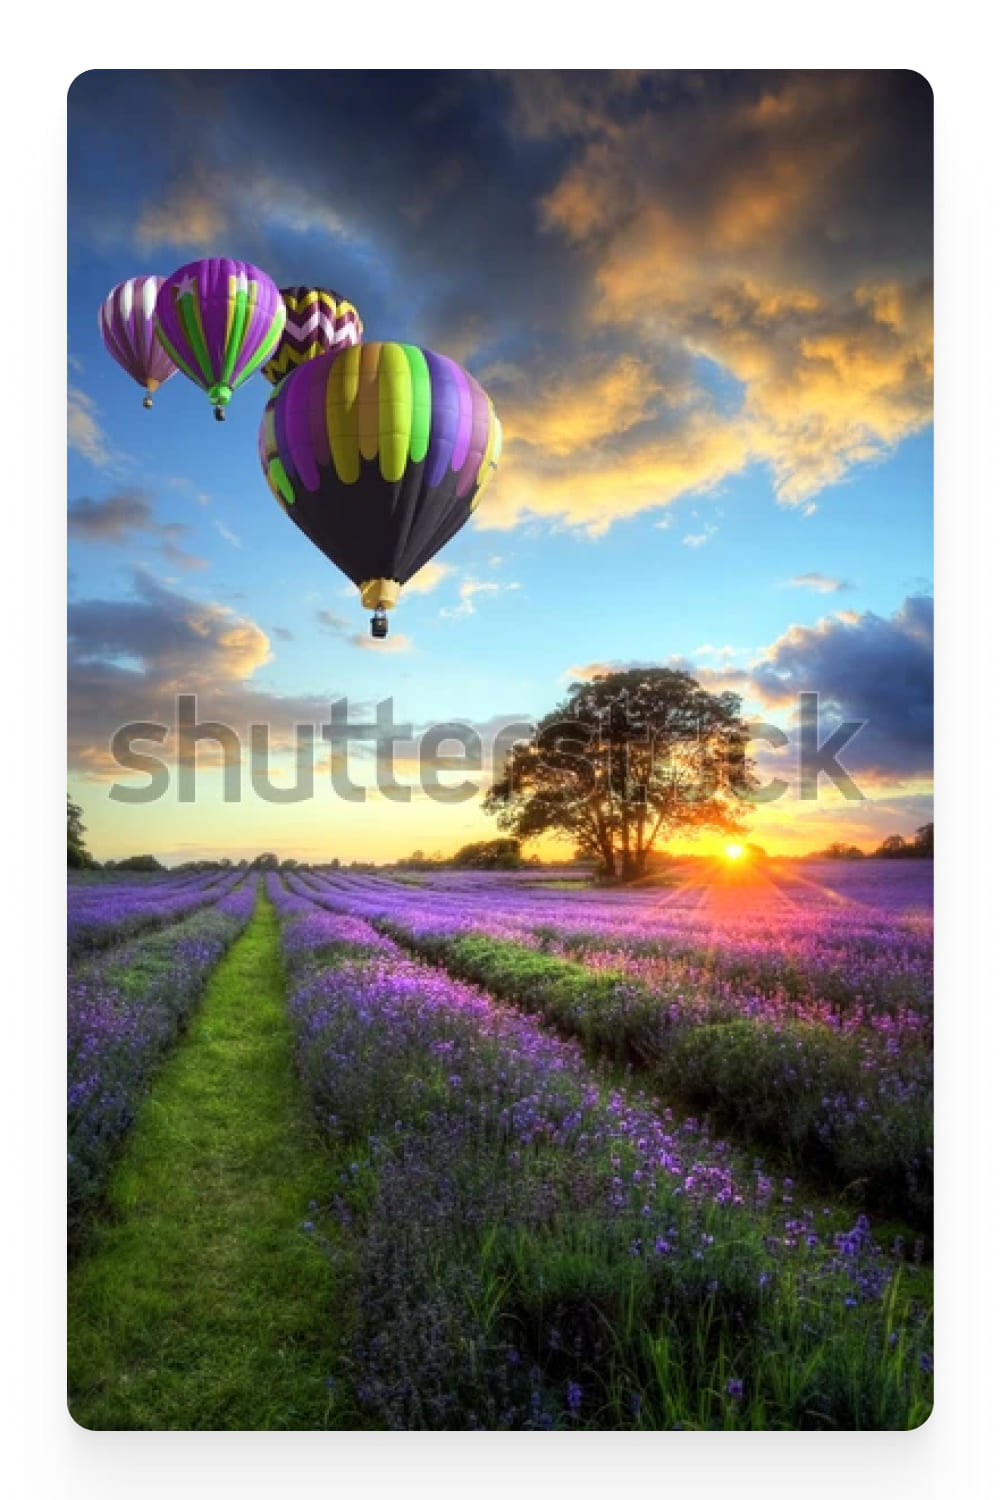 Photograph of hot air balloons over a lavender field.